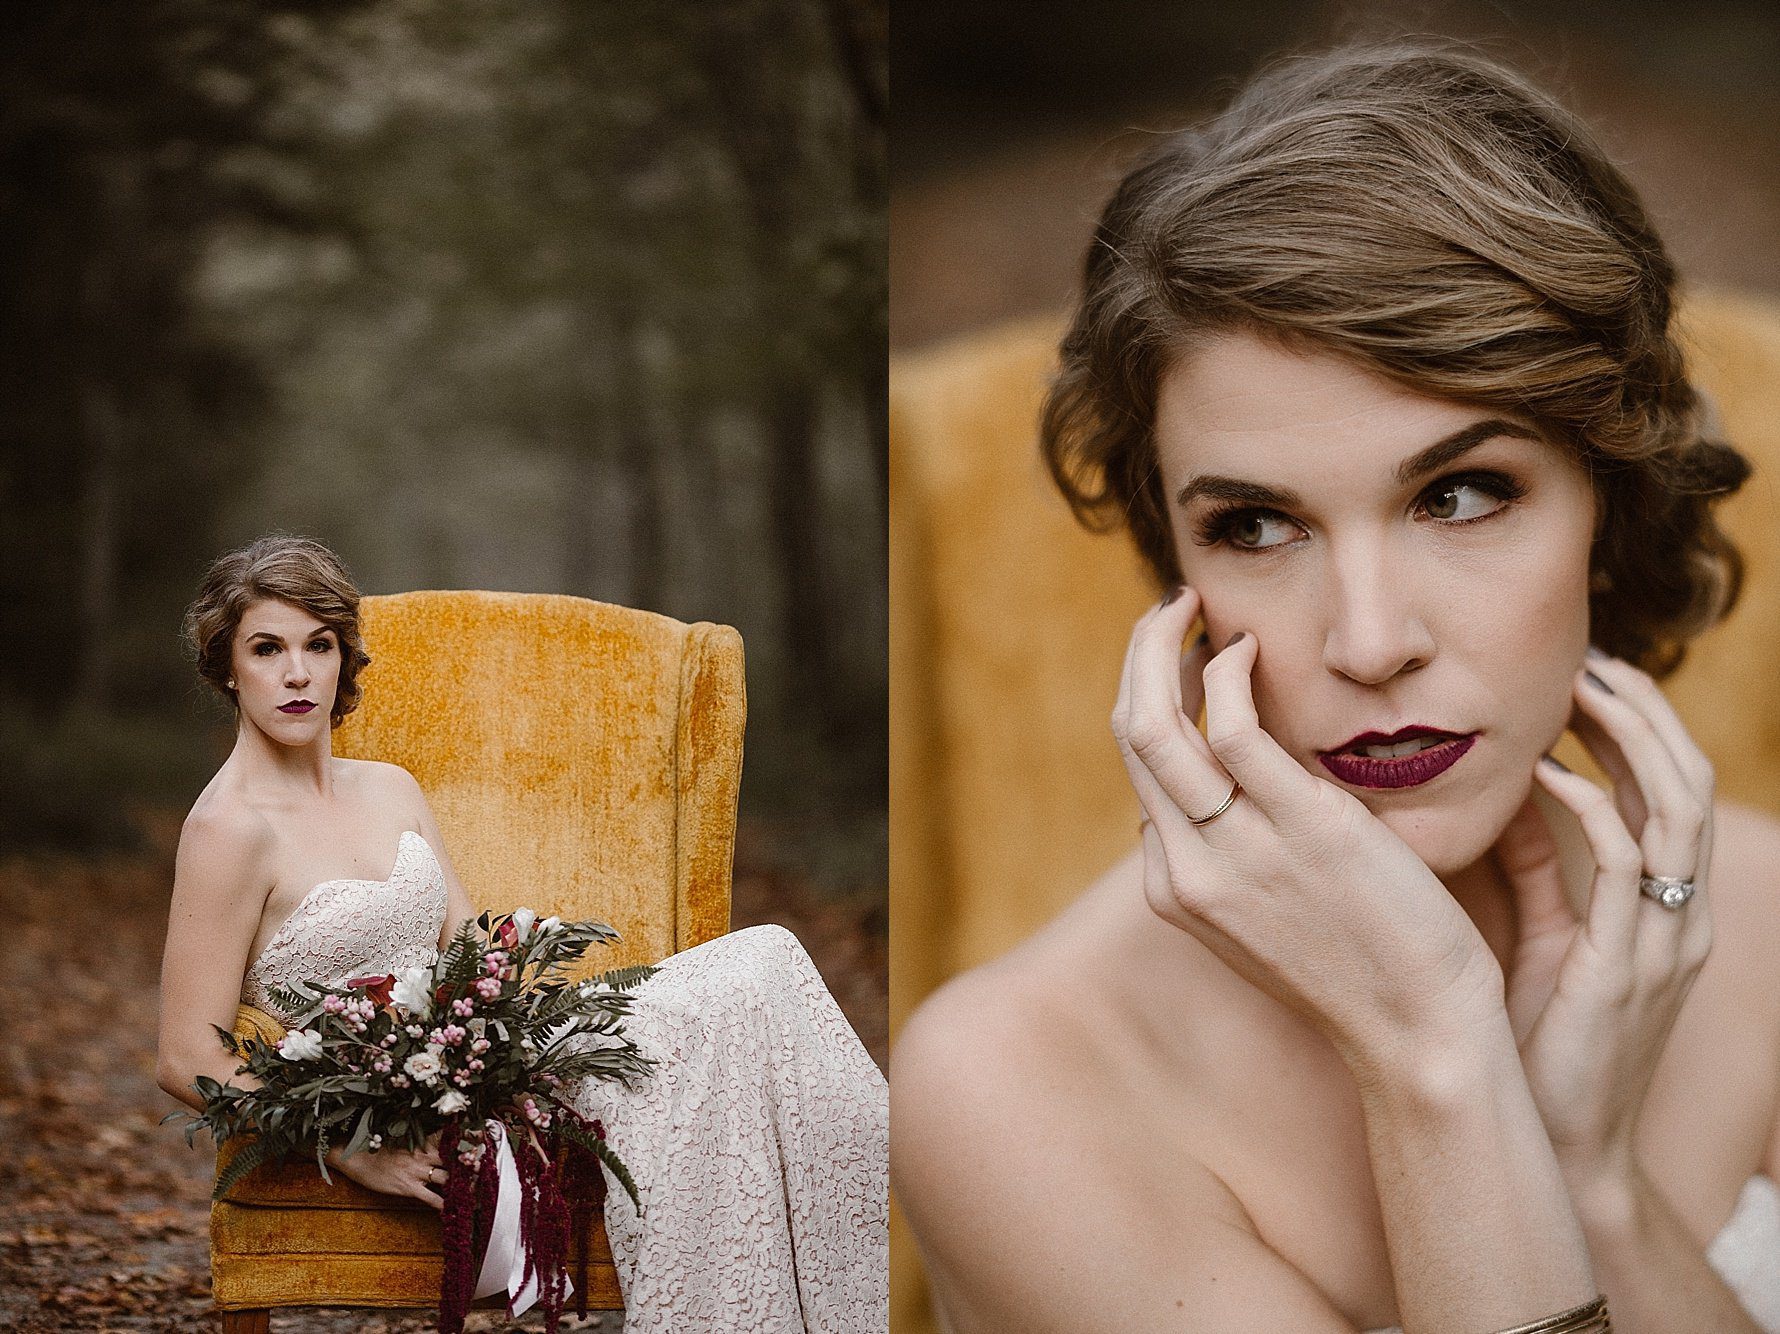 Vintage Chic Bridal Photos in Knoxville | Erin Morrison Photography www.erinmorrisonphotography.com